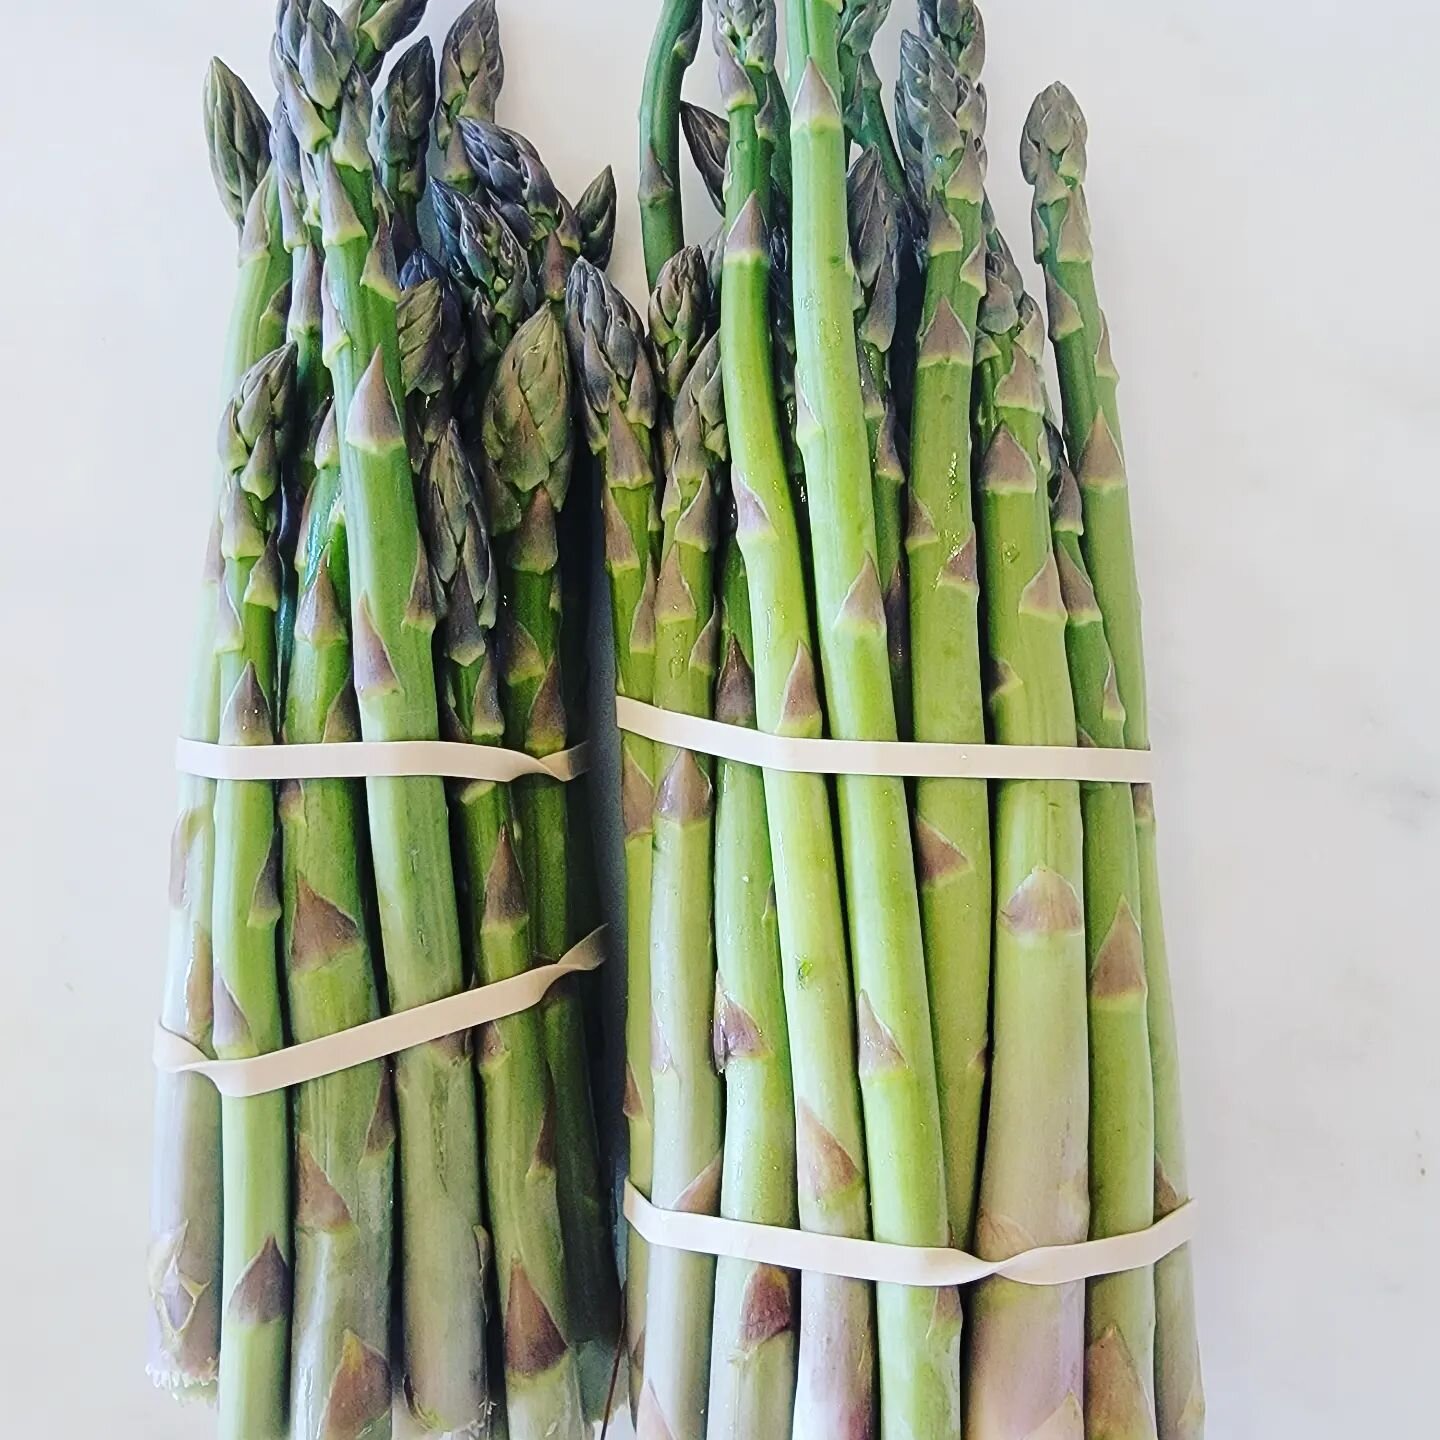 Local Produce! 

First we had Spinach, Now Asparagus... 

#local
#spring
#supportlocal